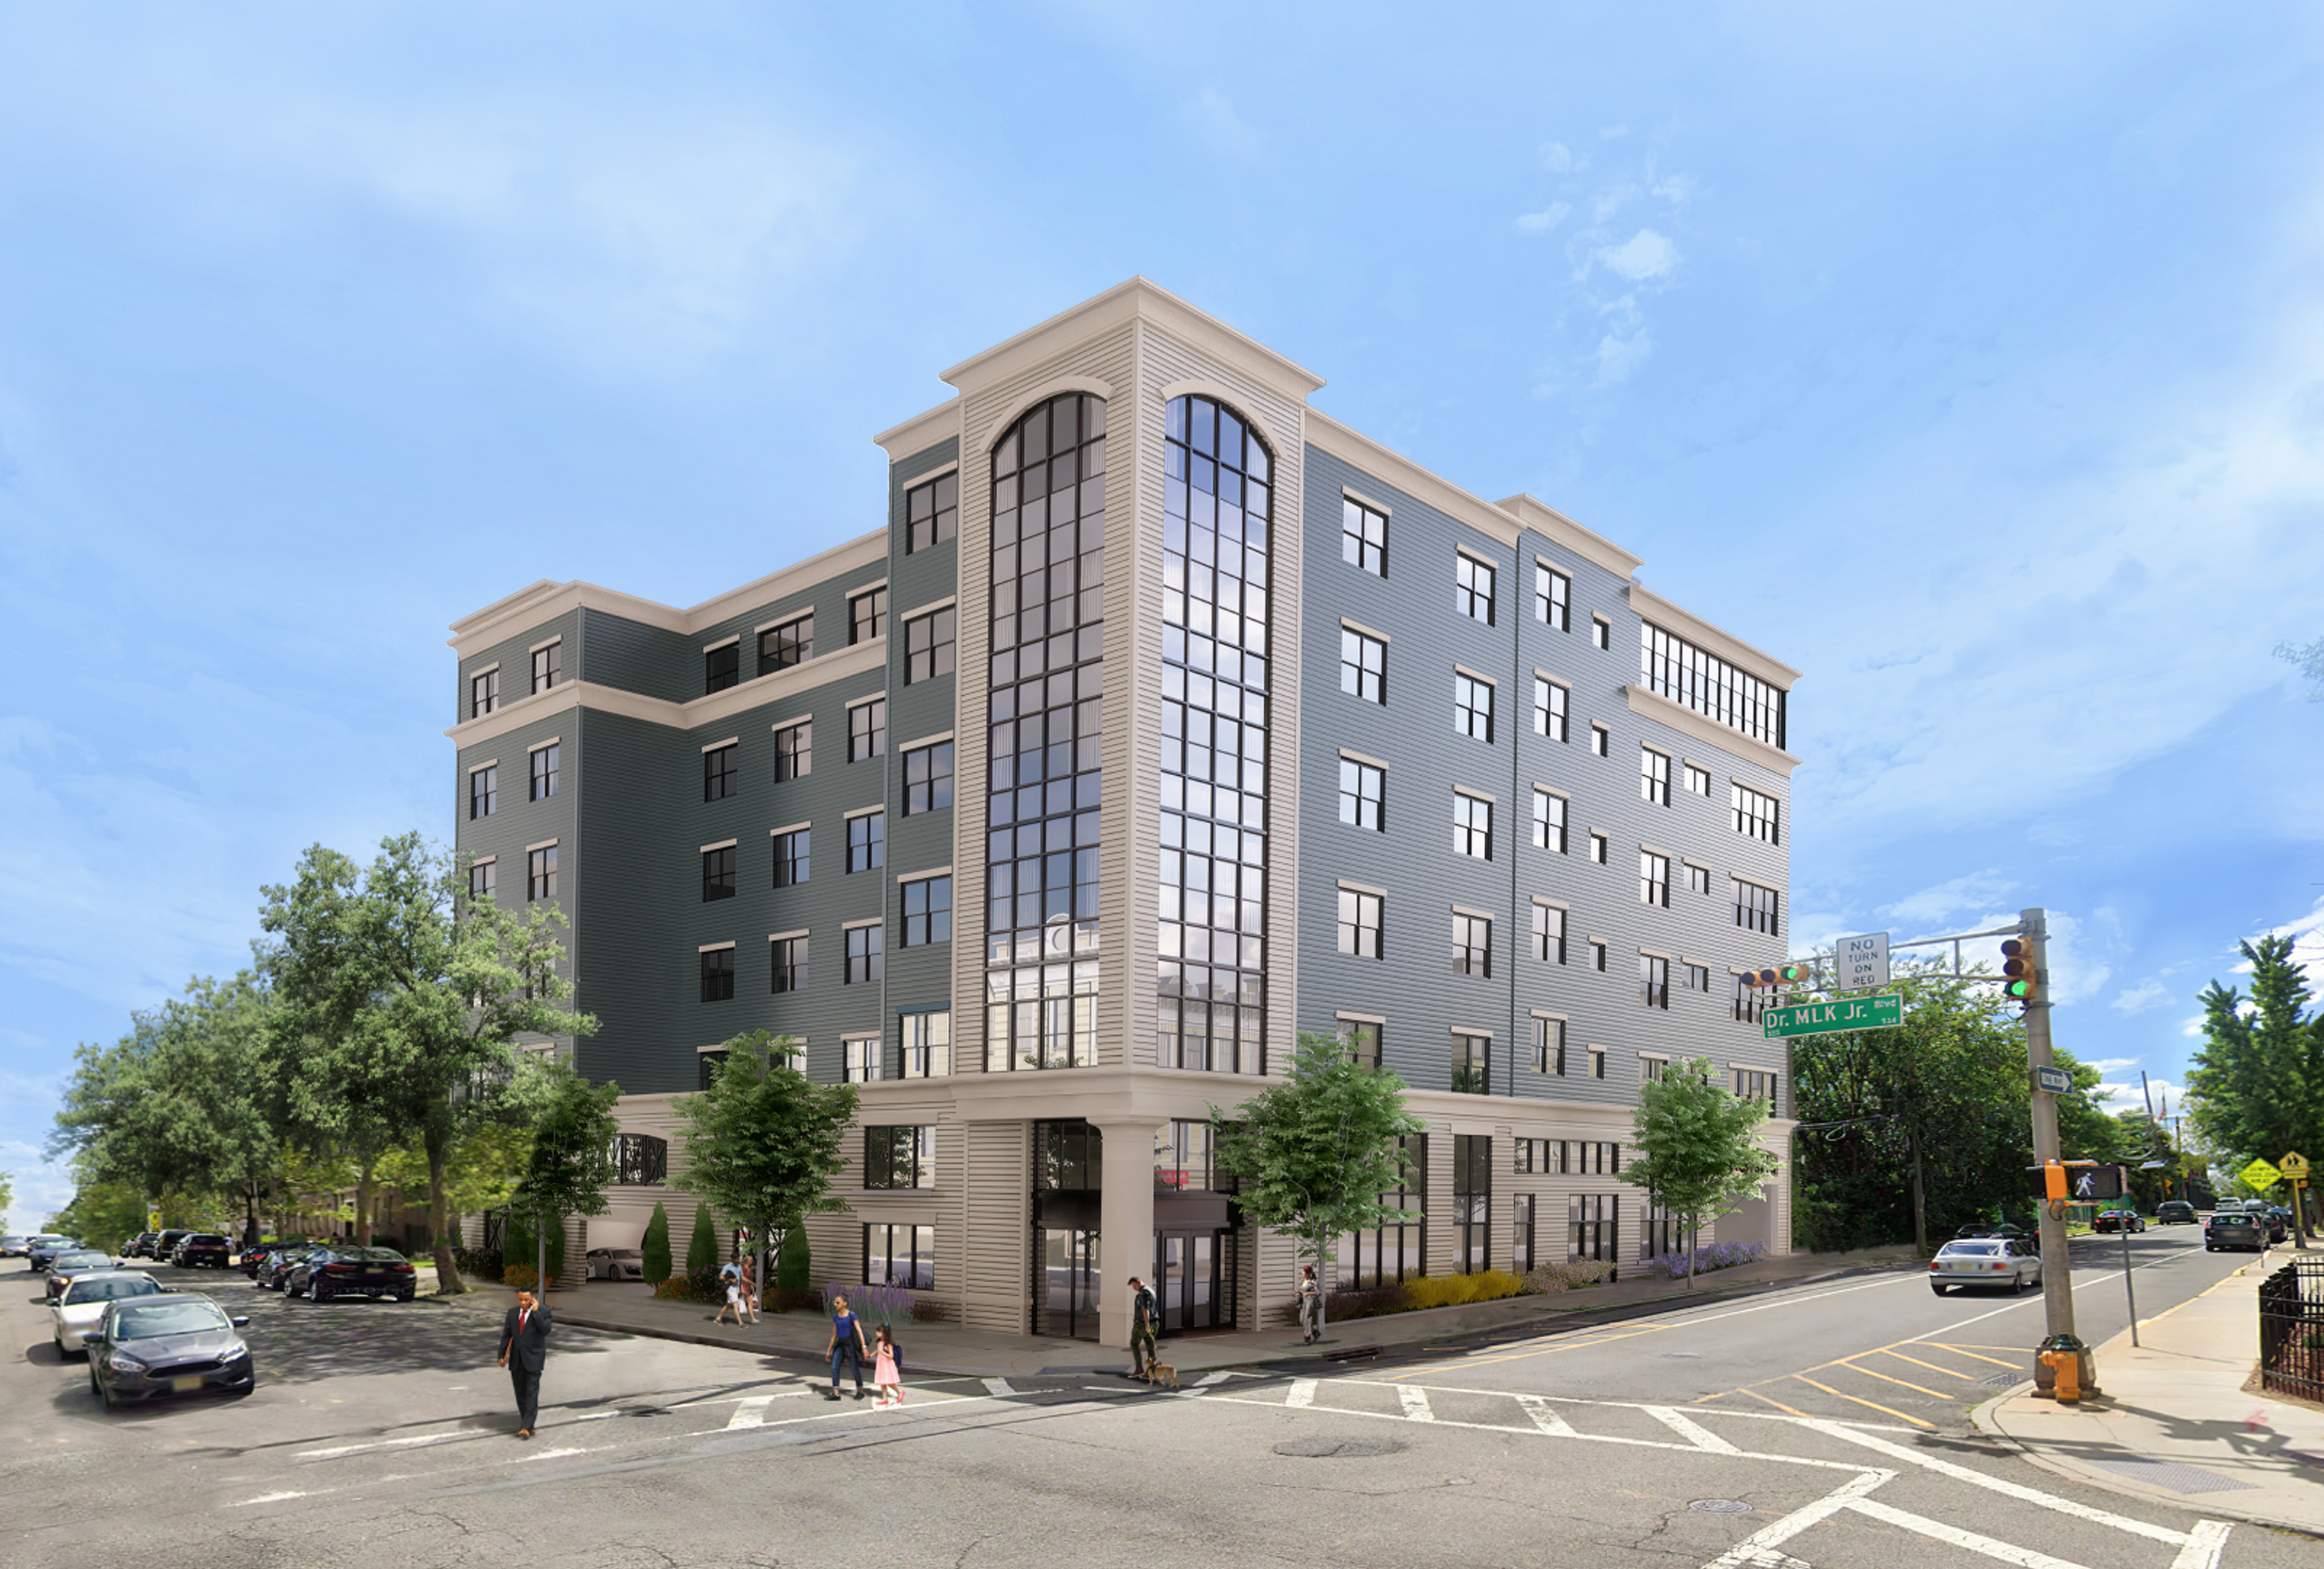 The BLVD is a proposed 41-unit multifamily development in the Mid-Atlantic pipeline